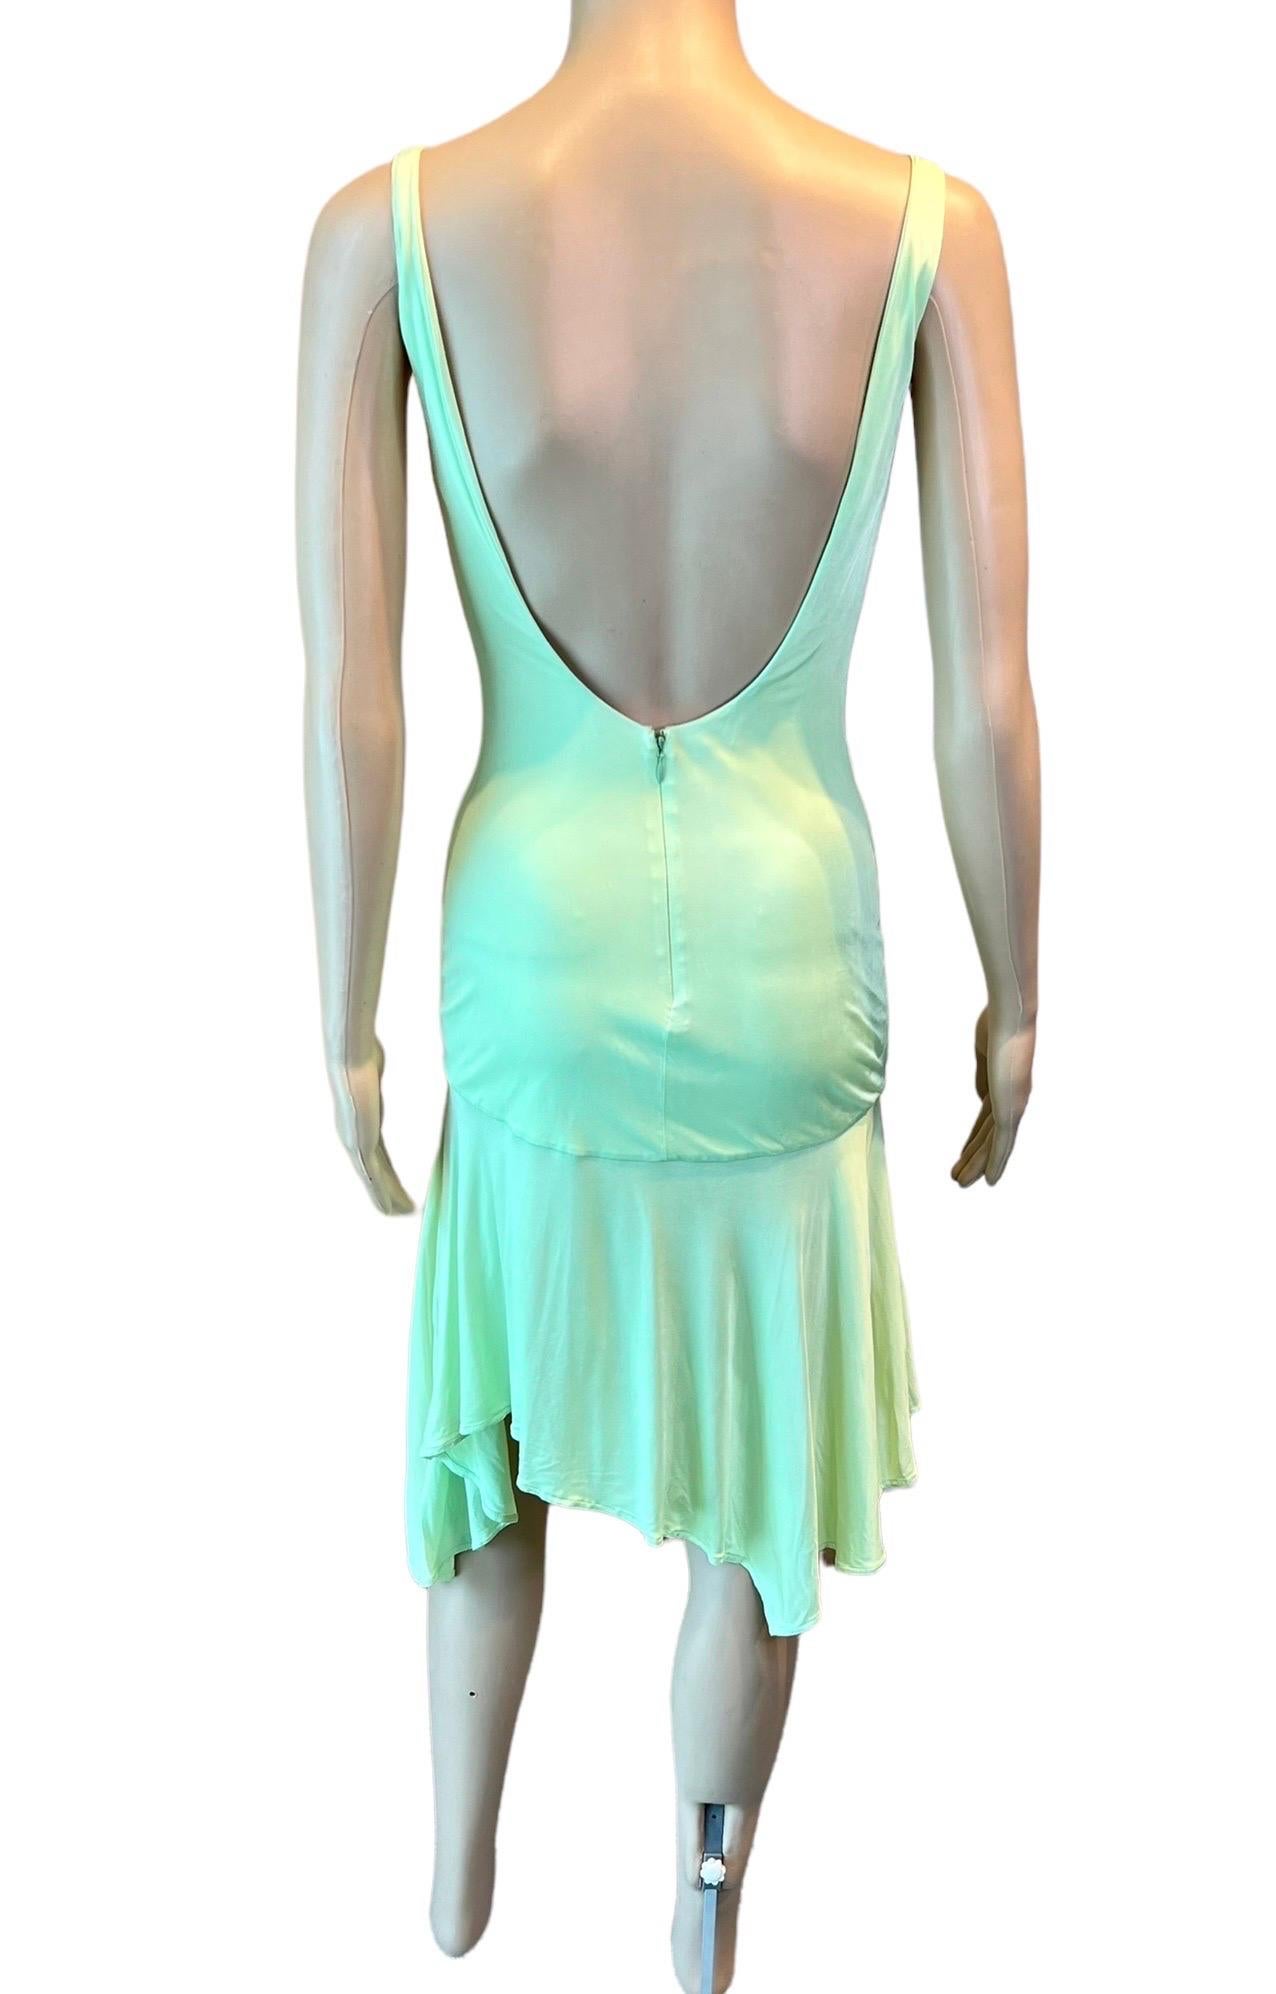 Gianni Versace S/S 1995 Runway Medusa Embellished Backless Slip Evening Dress In Good Condition For Sale In Naples, FL